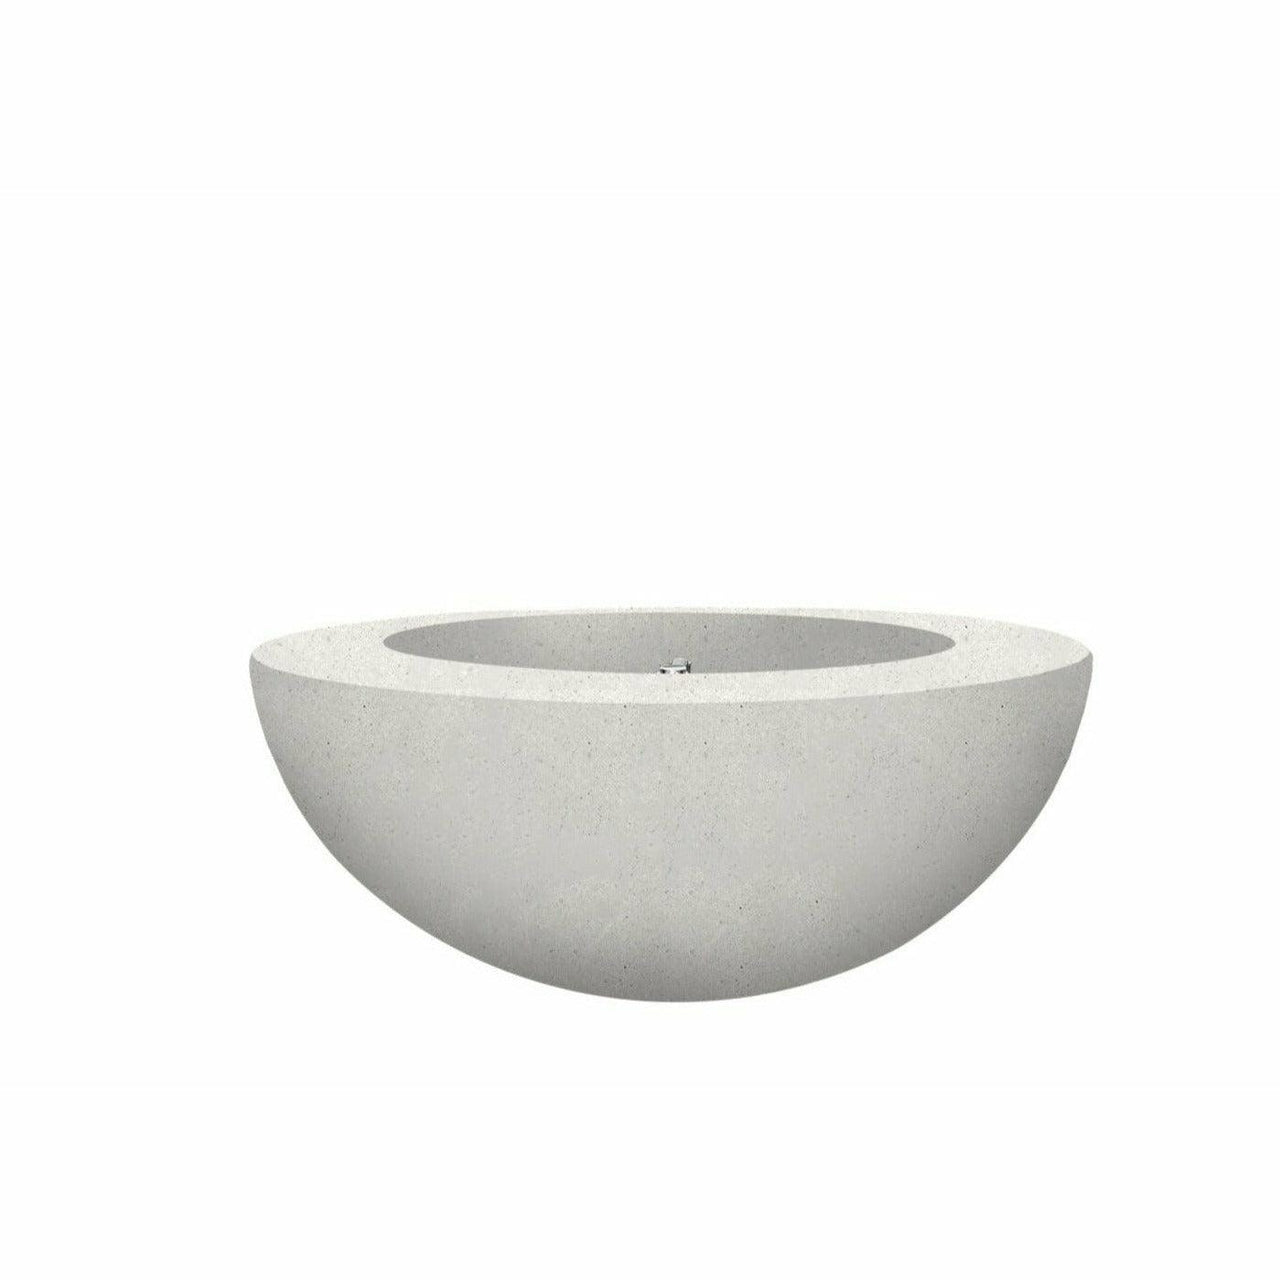 Prism Hardscapes - Moderno Series 5 Round Concrete Fire Bowl - Fire Pit Stock